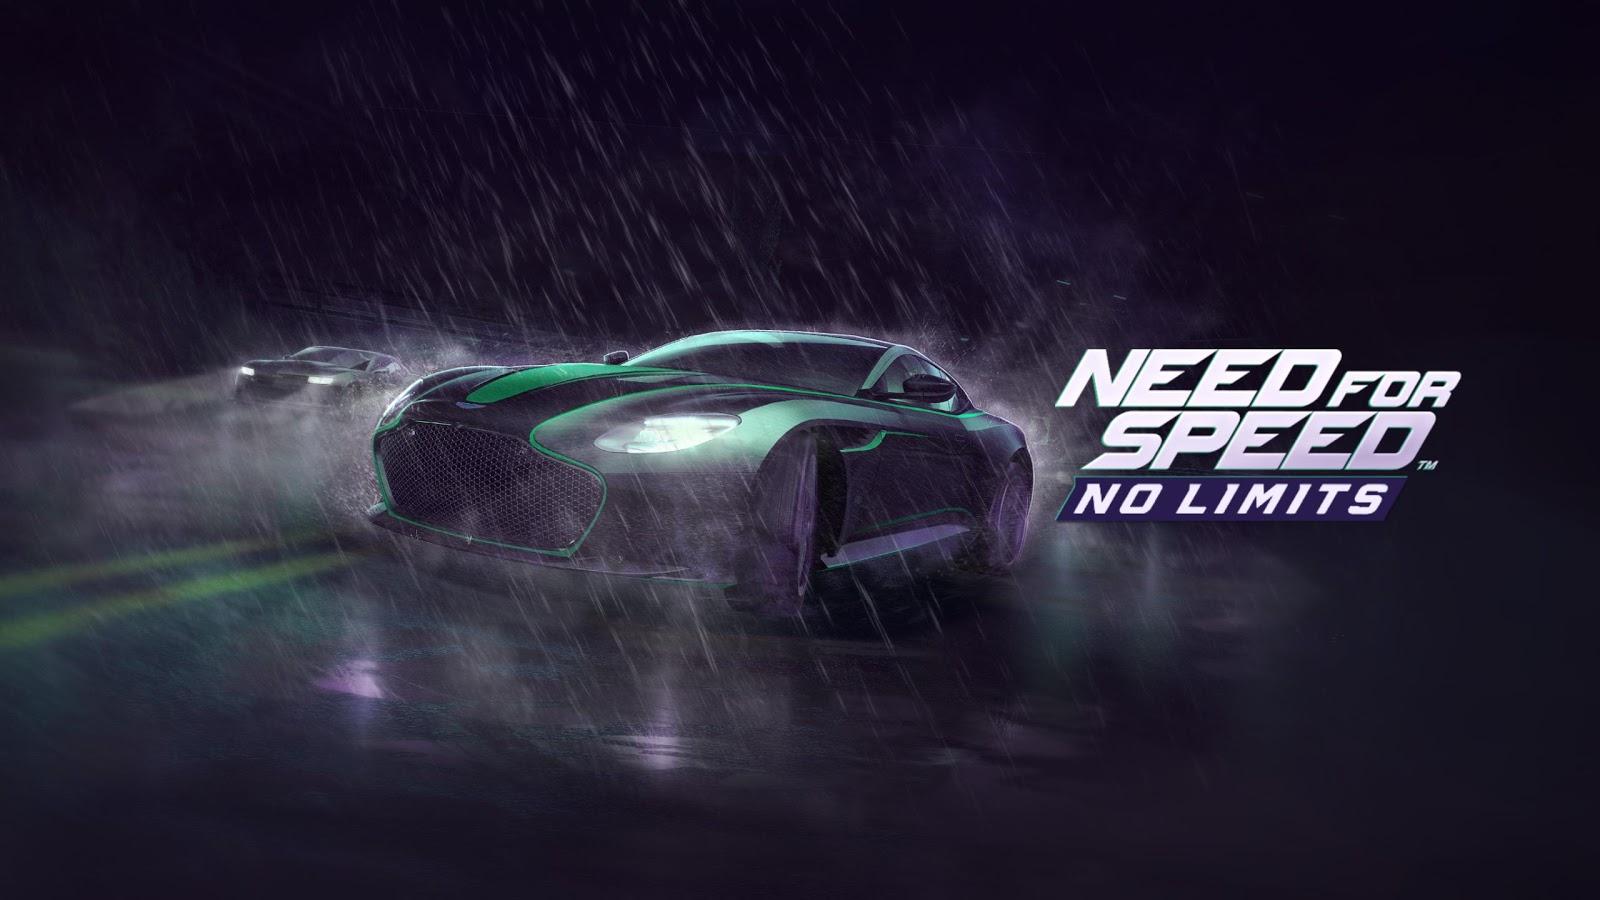 Nfs no limited mod. Игра need for Speed no limits. Need for Speed nl гонки. 2. Need for Speed: nl гонки. Нфс ноу лимит.